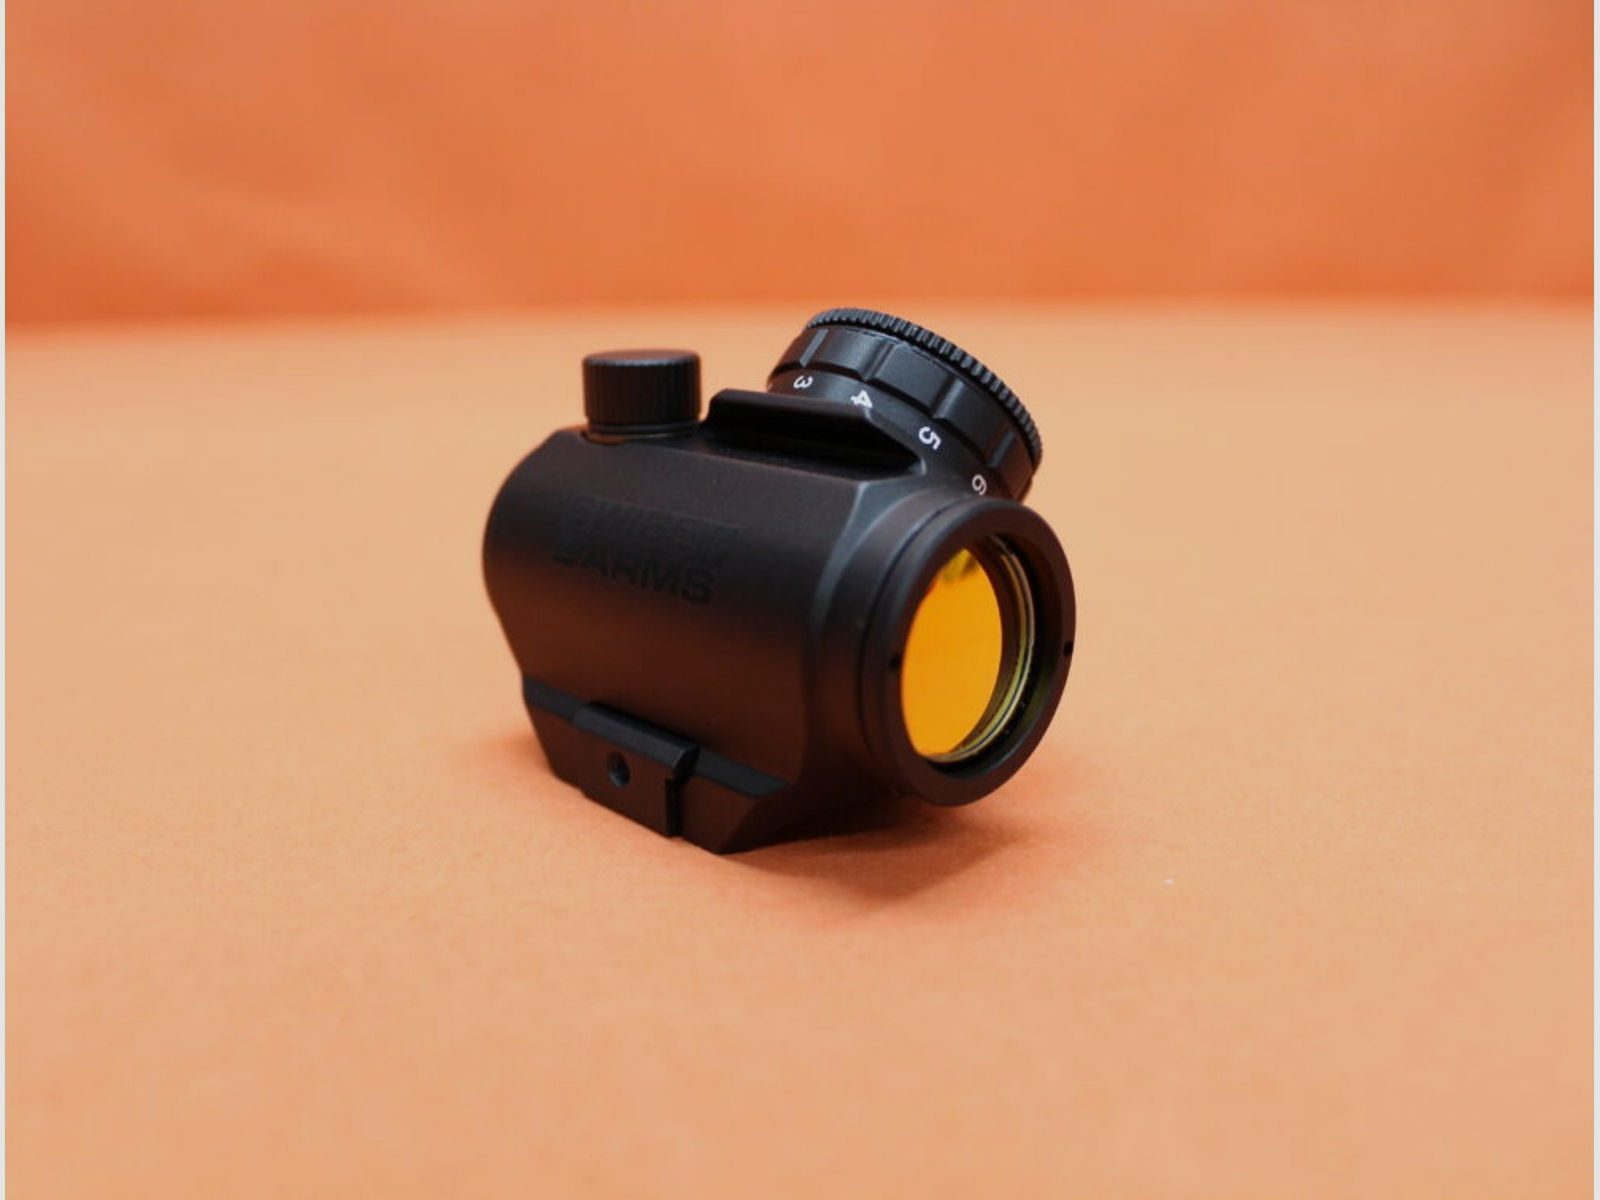 Swiss Arms	 Swiss Arms Mini Red Dot Sight Leuchtpunktvisier mit Montage f. Weaver-/ Picatinnyprofil